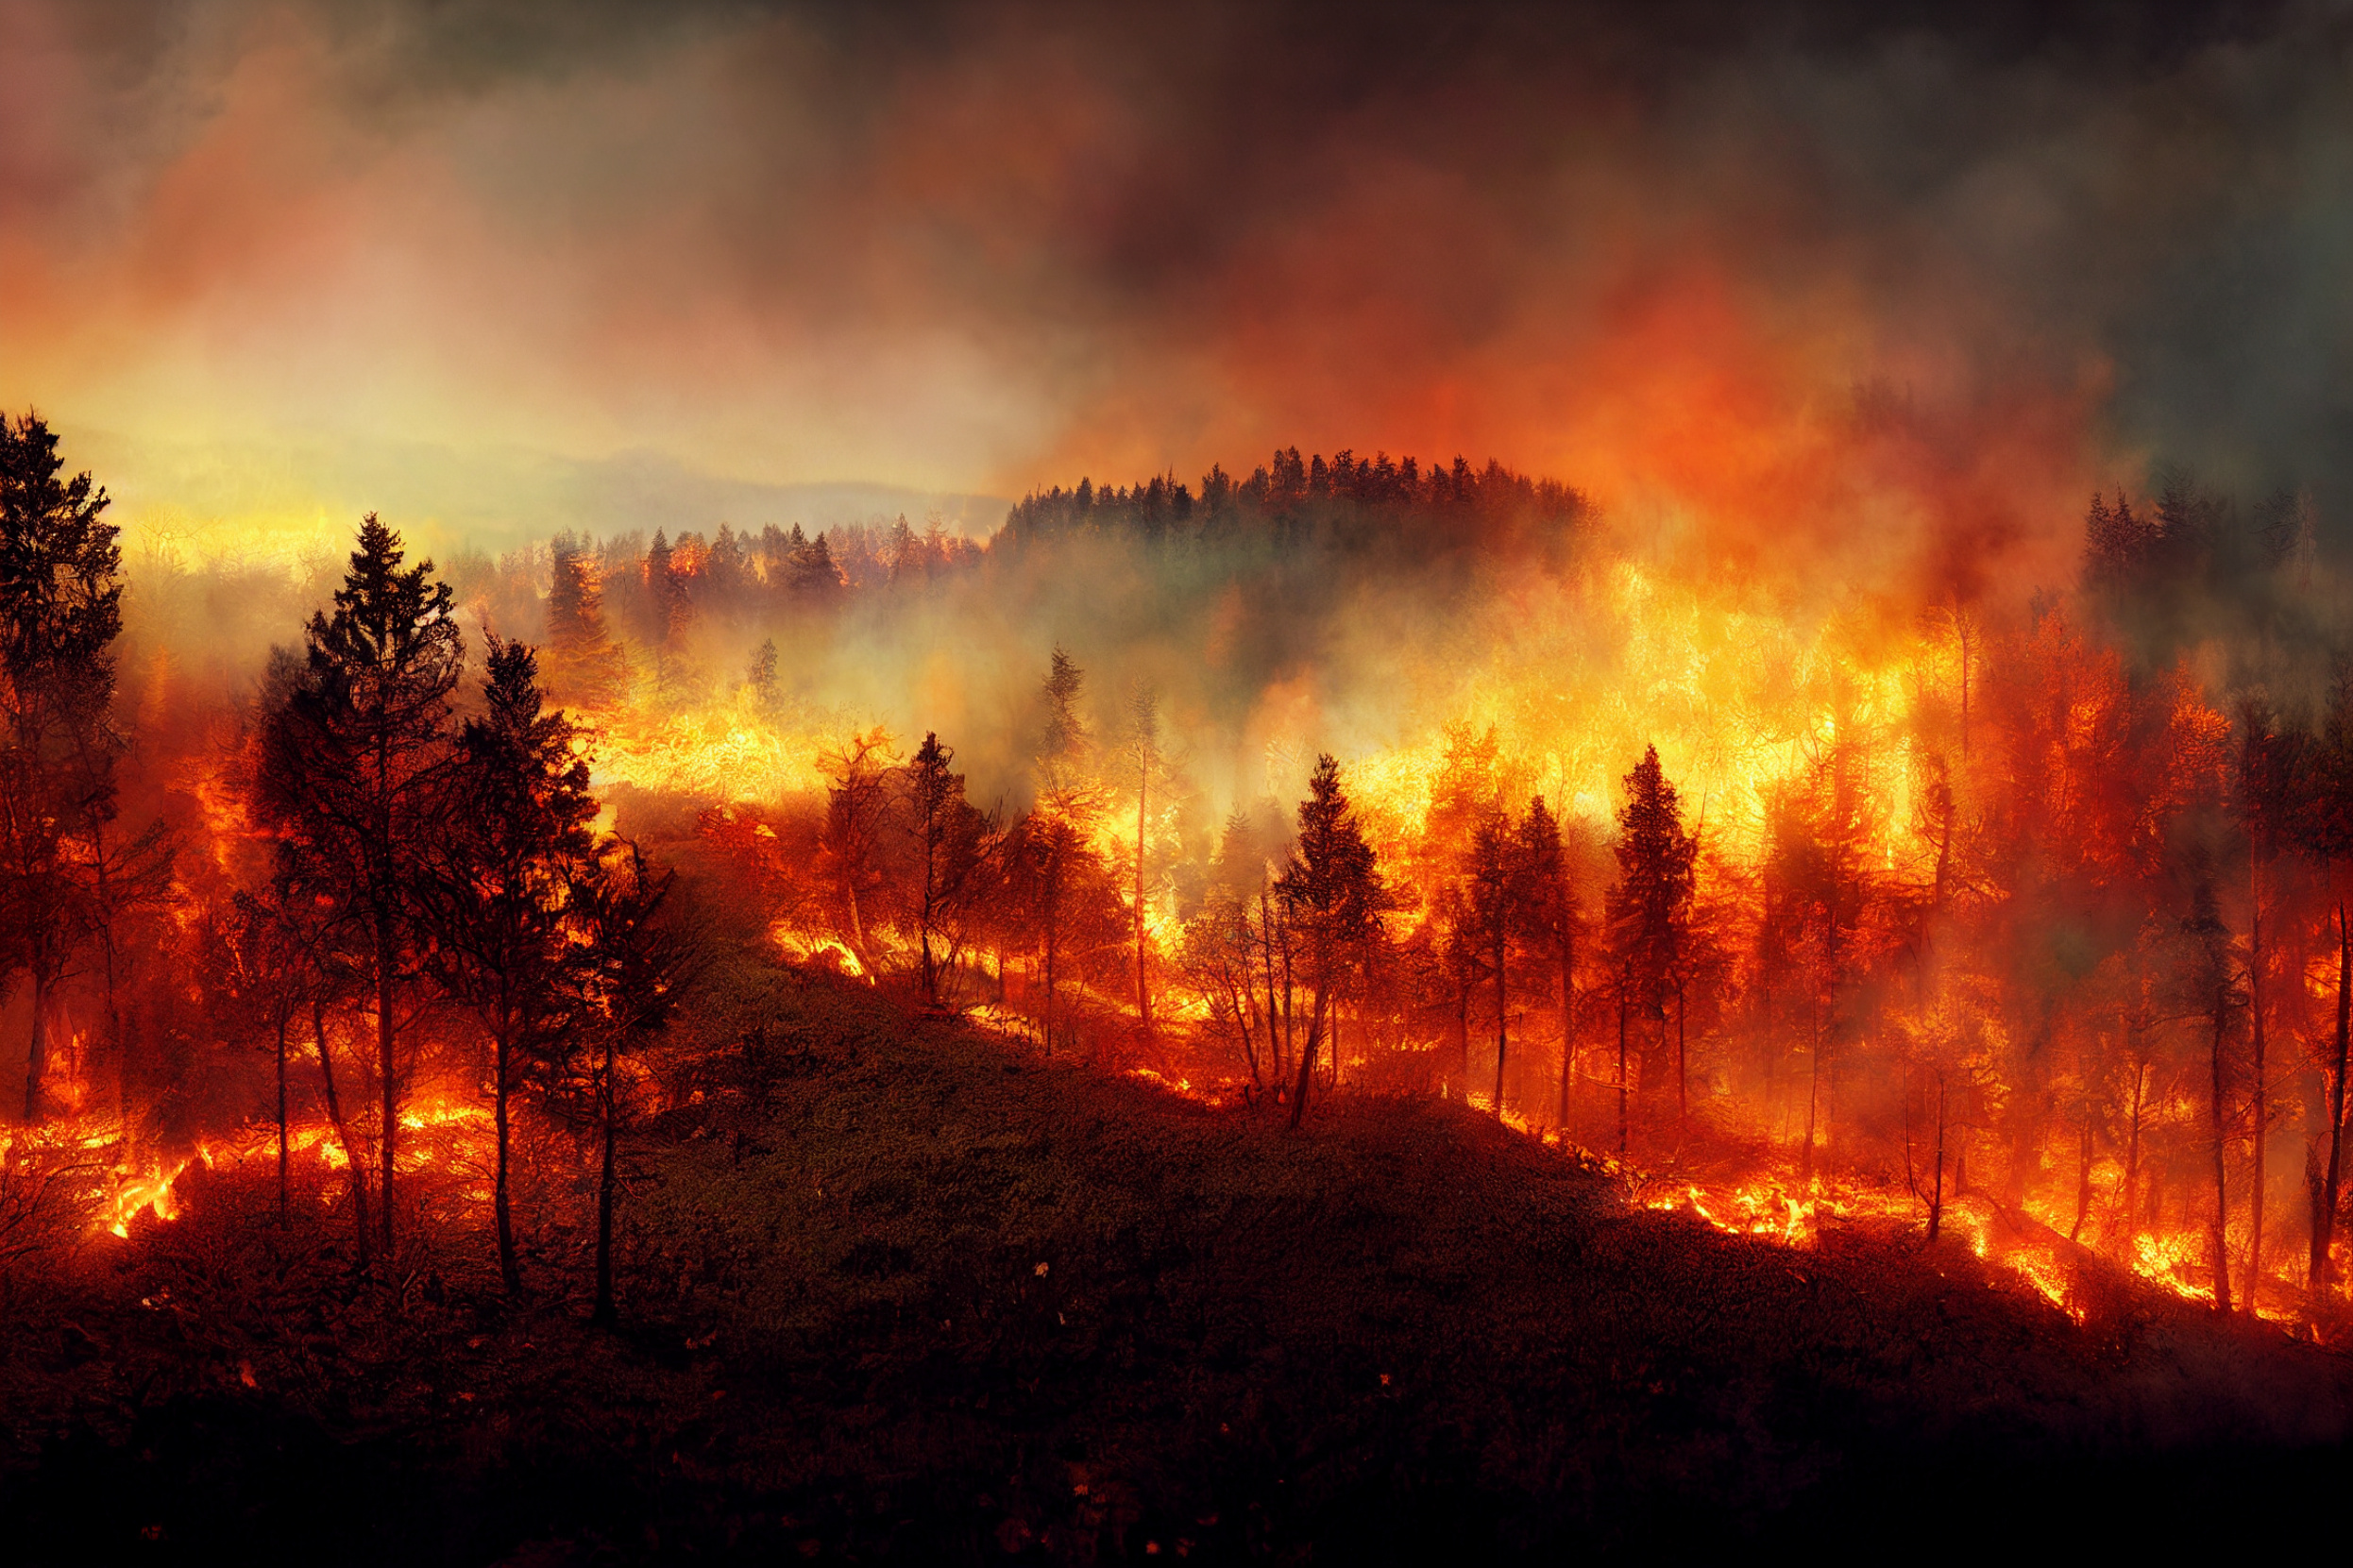 Forest fire disaster illustration (photo-like), trees burning at night